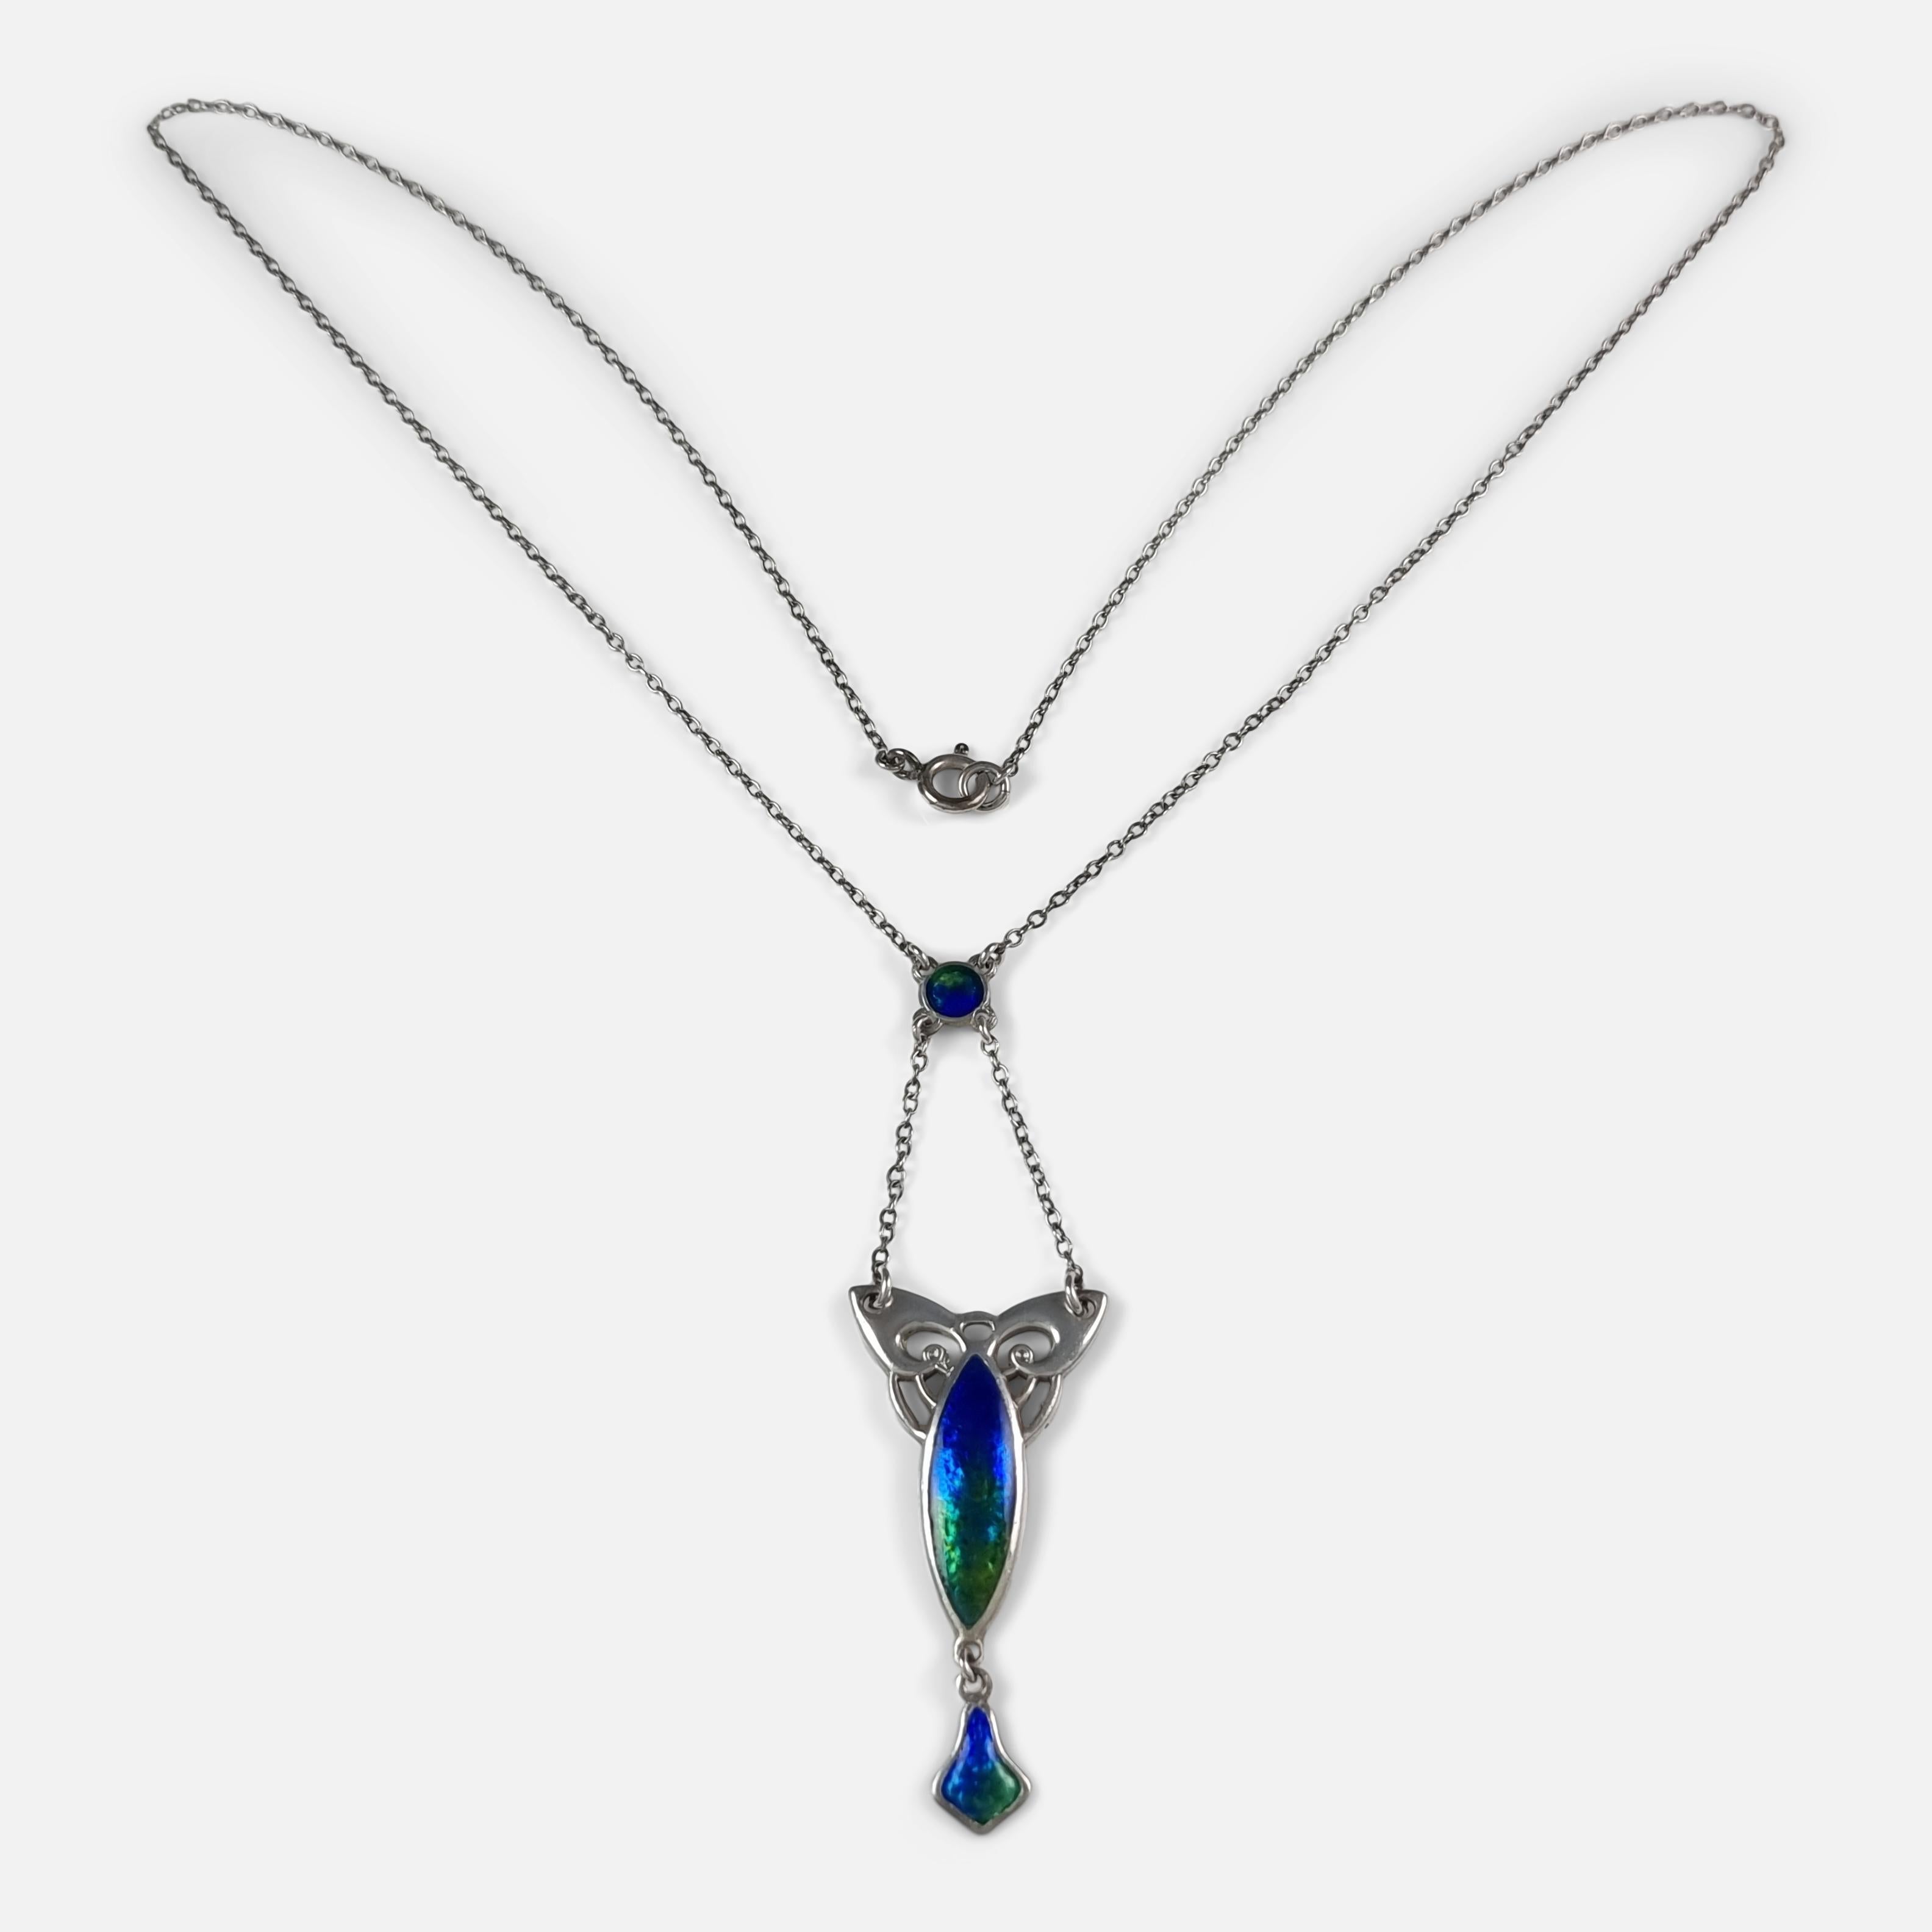 An Art Nouveau sterling silver and enamel pendant necklace by Charles Horner. The open-work pendant is enameled in shades of blue and green, leading to a further enameled drop. The pendant is connected by two trace link chains to an enameled